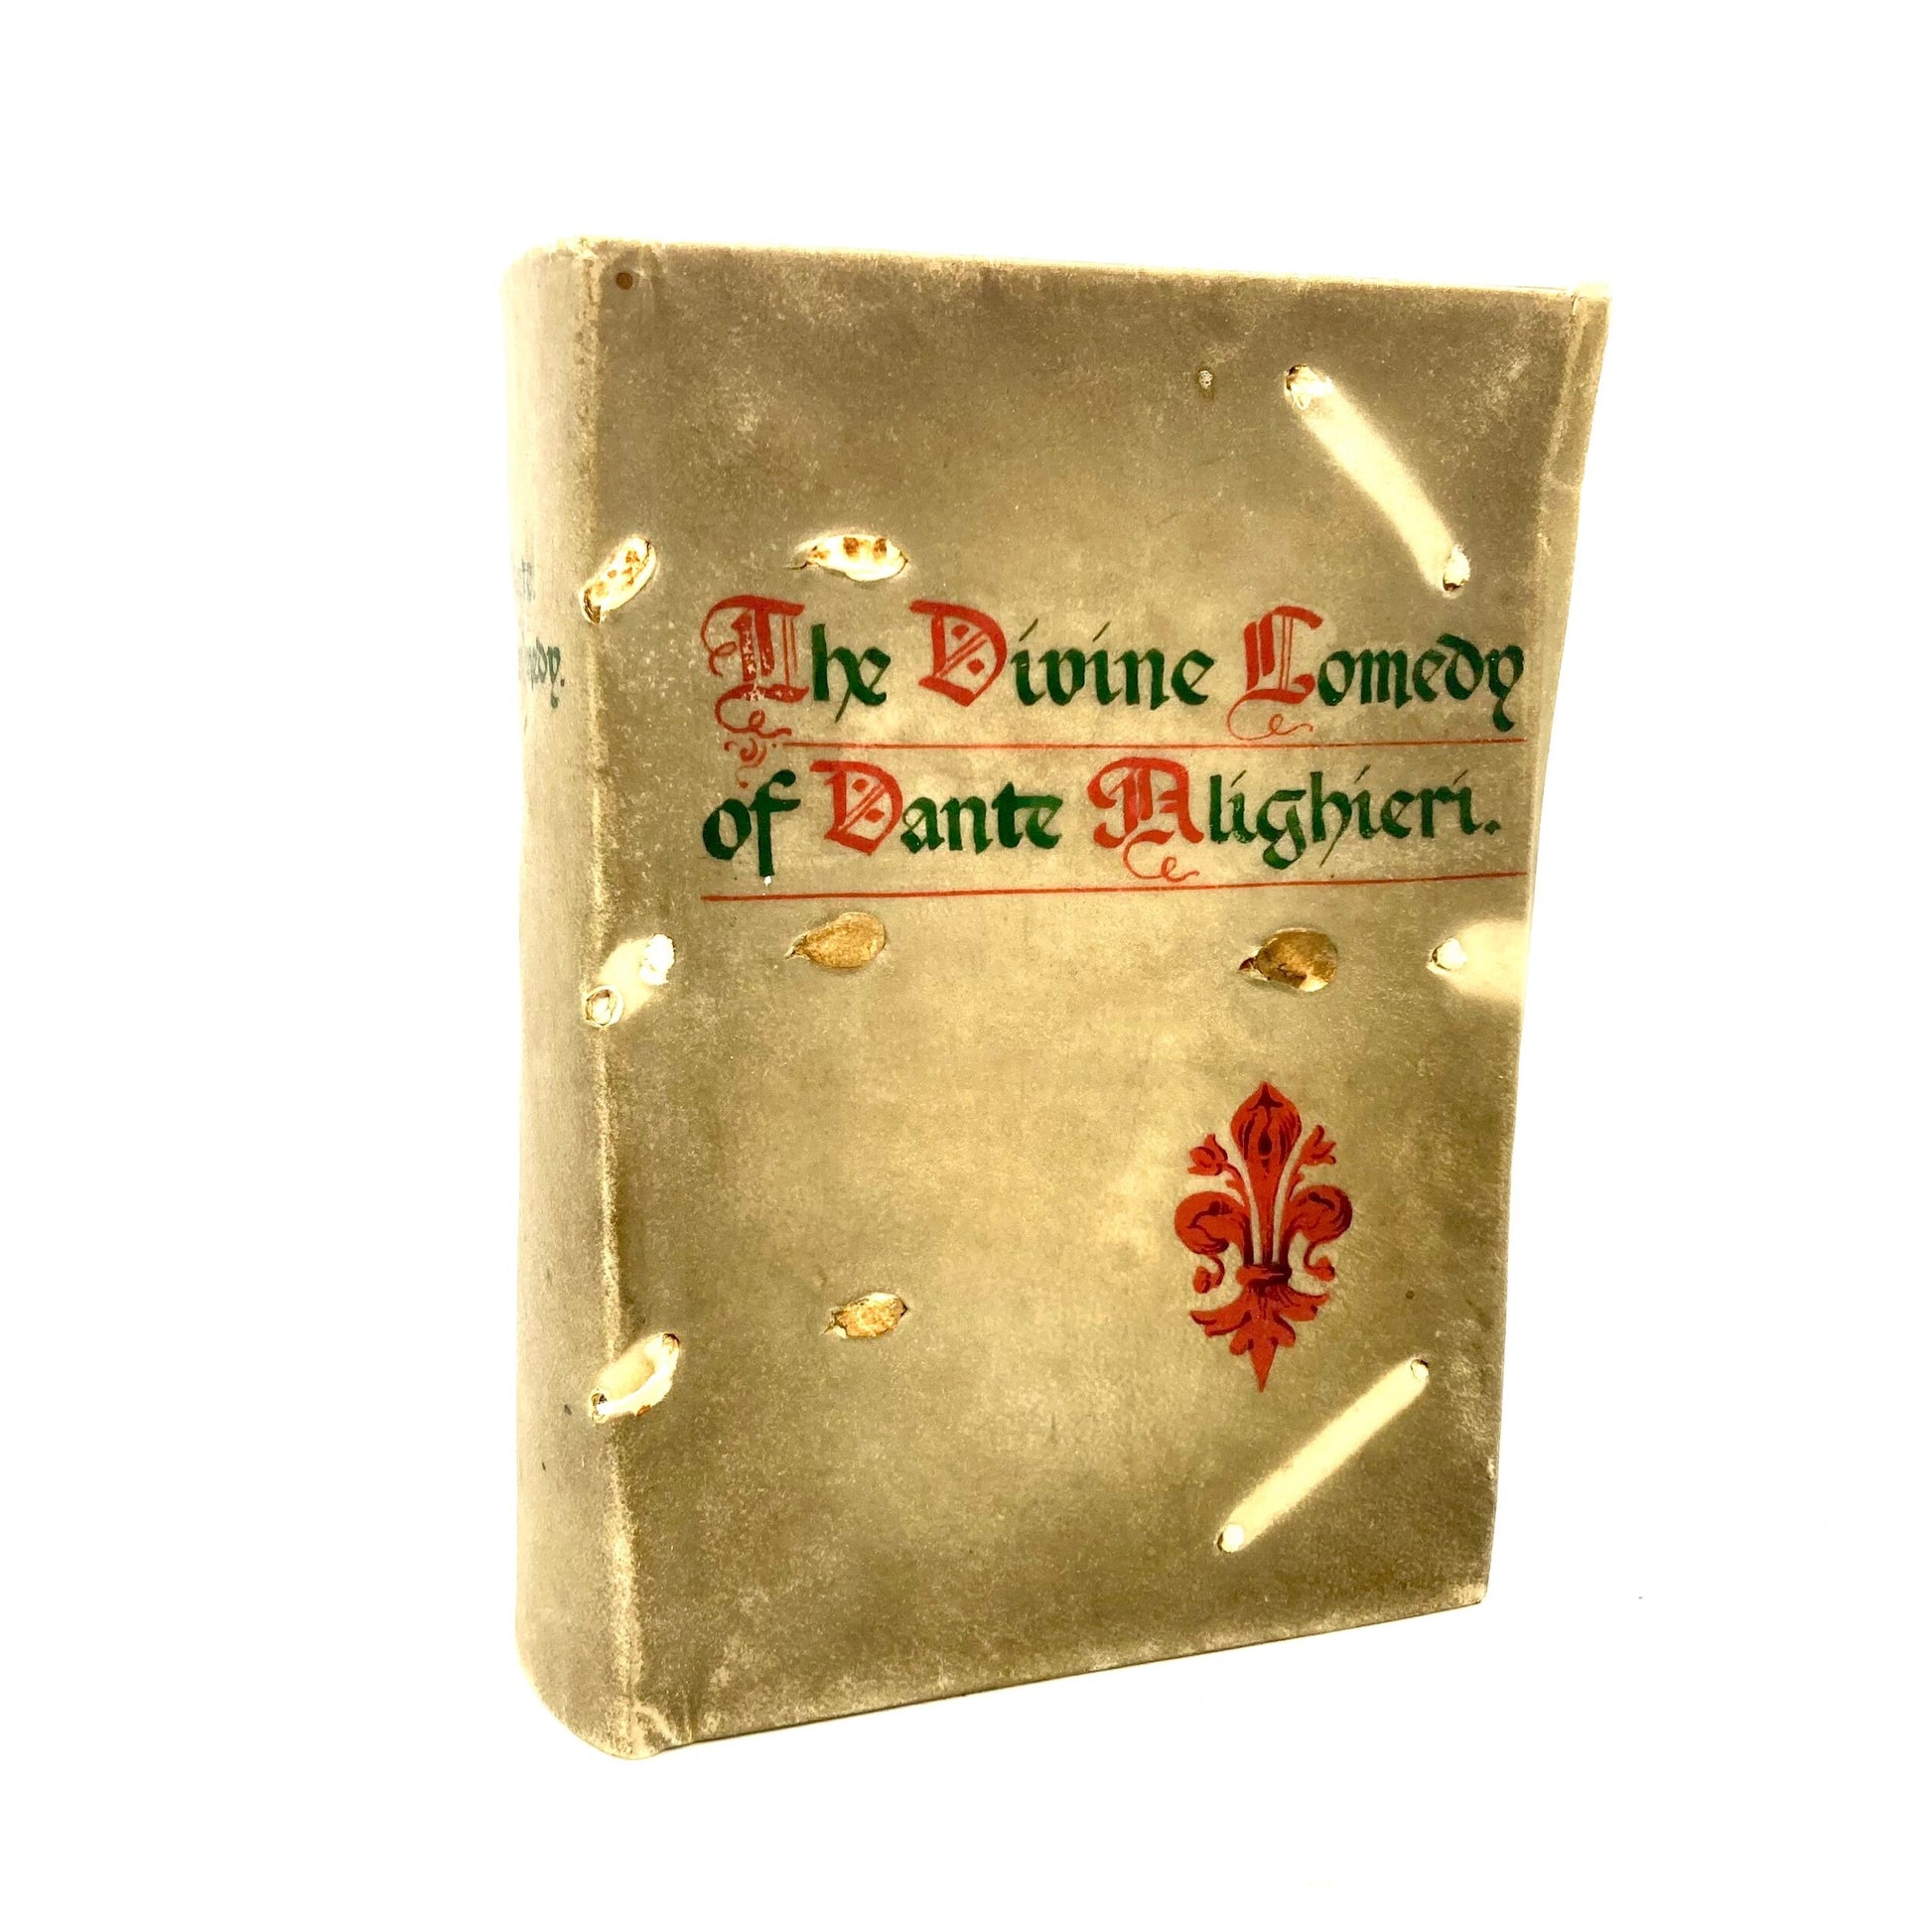 ALIGHIERI, Dante "The Divine Comedy" Translated by Henry Wadsworth Longfellow [George Routledge, c1906] - Buzz Bookstore